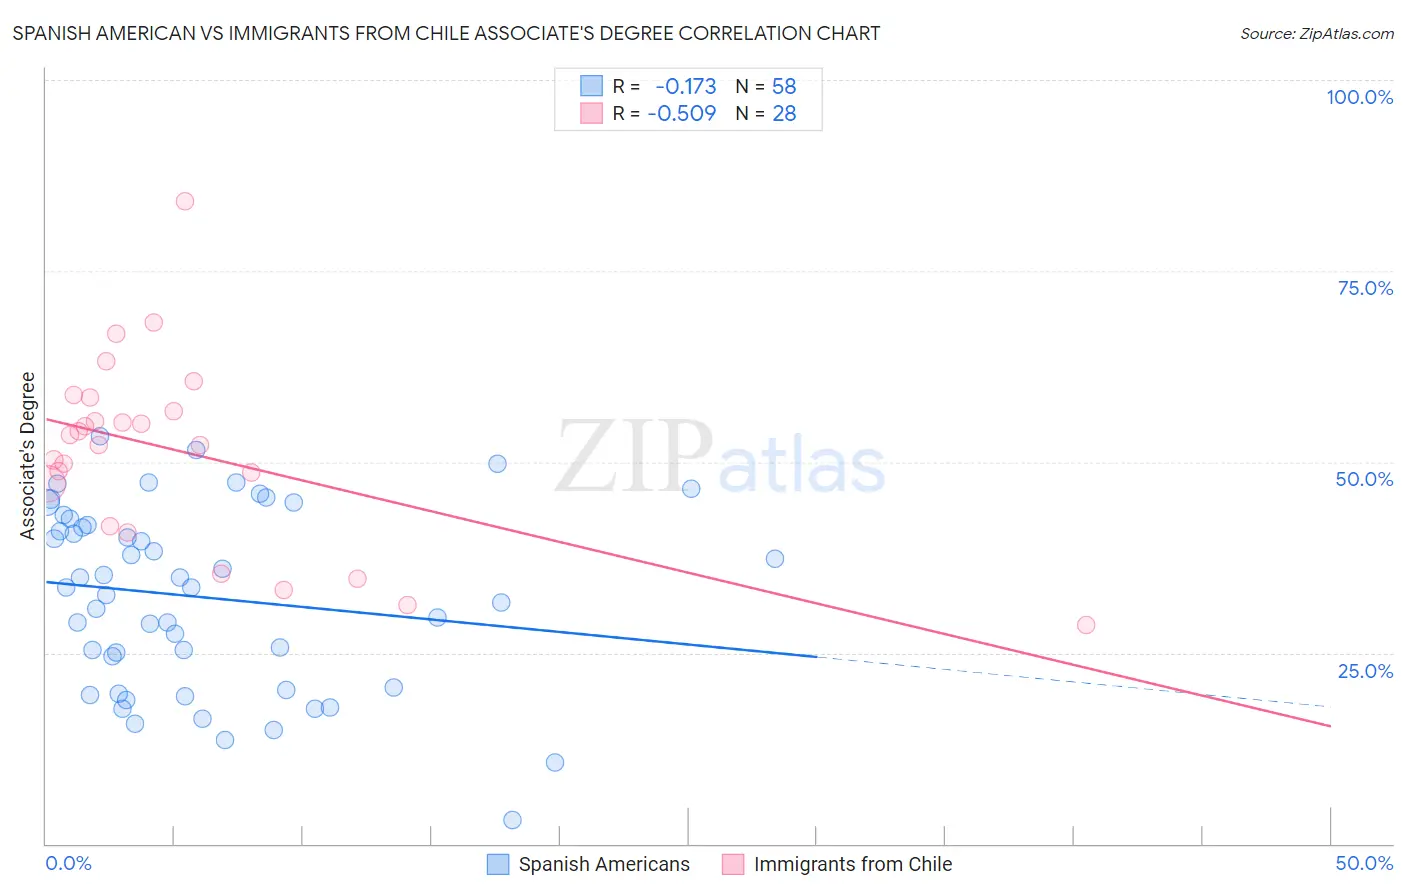 Spanish American vs Immigrants from Chile Associate's Degree